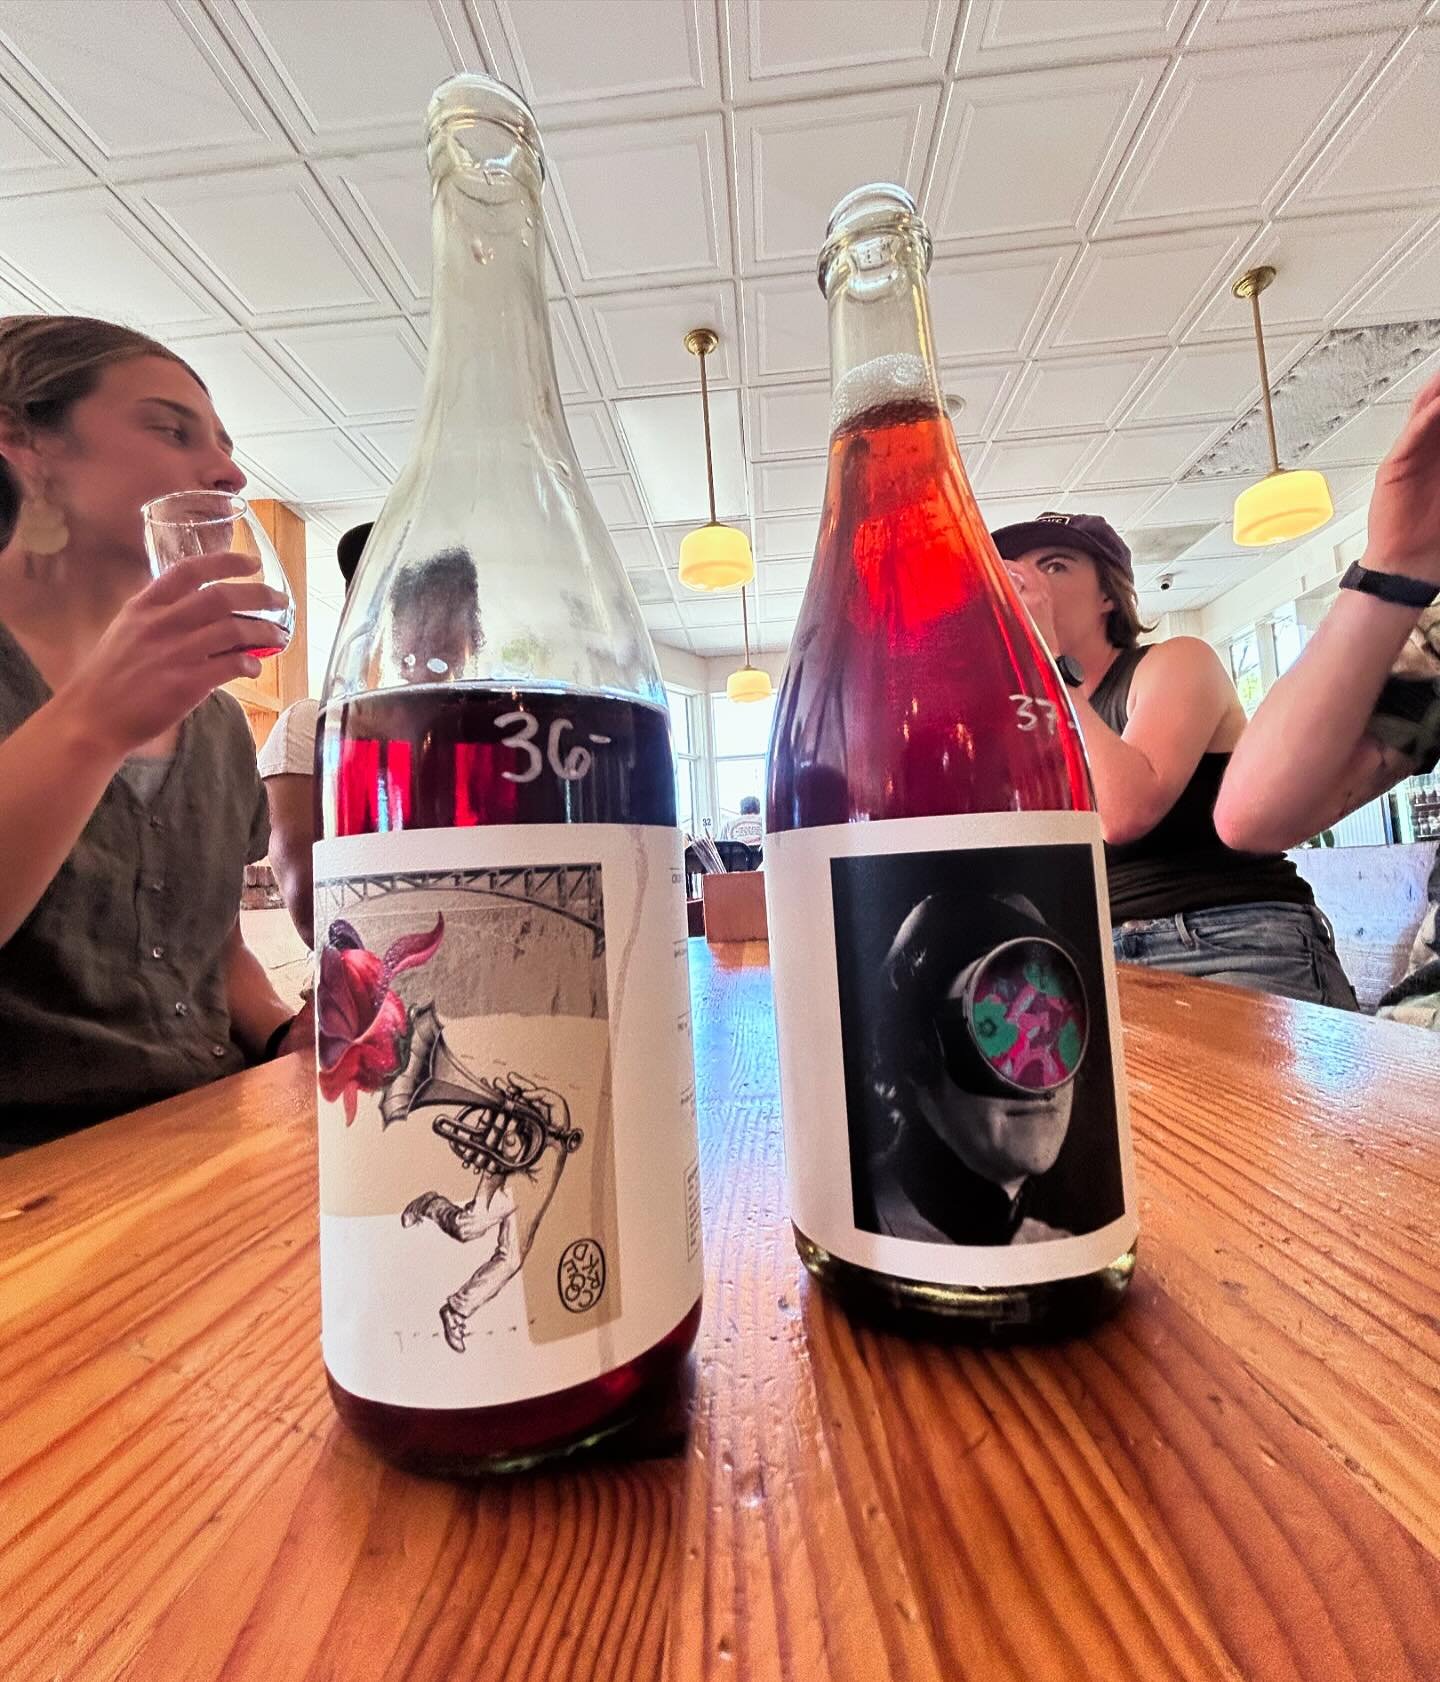 We are now selling @crookedwineco in our cold case! Natural and beautiful; as it should be. Fuchsia Ros&egrave; or Freak Flag Pet Nat&hellip; Both wines are incredibly perfect for this lovely sunshiney weather. Stop by and grab a bottle or two today!